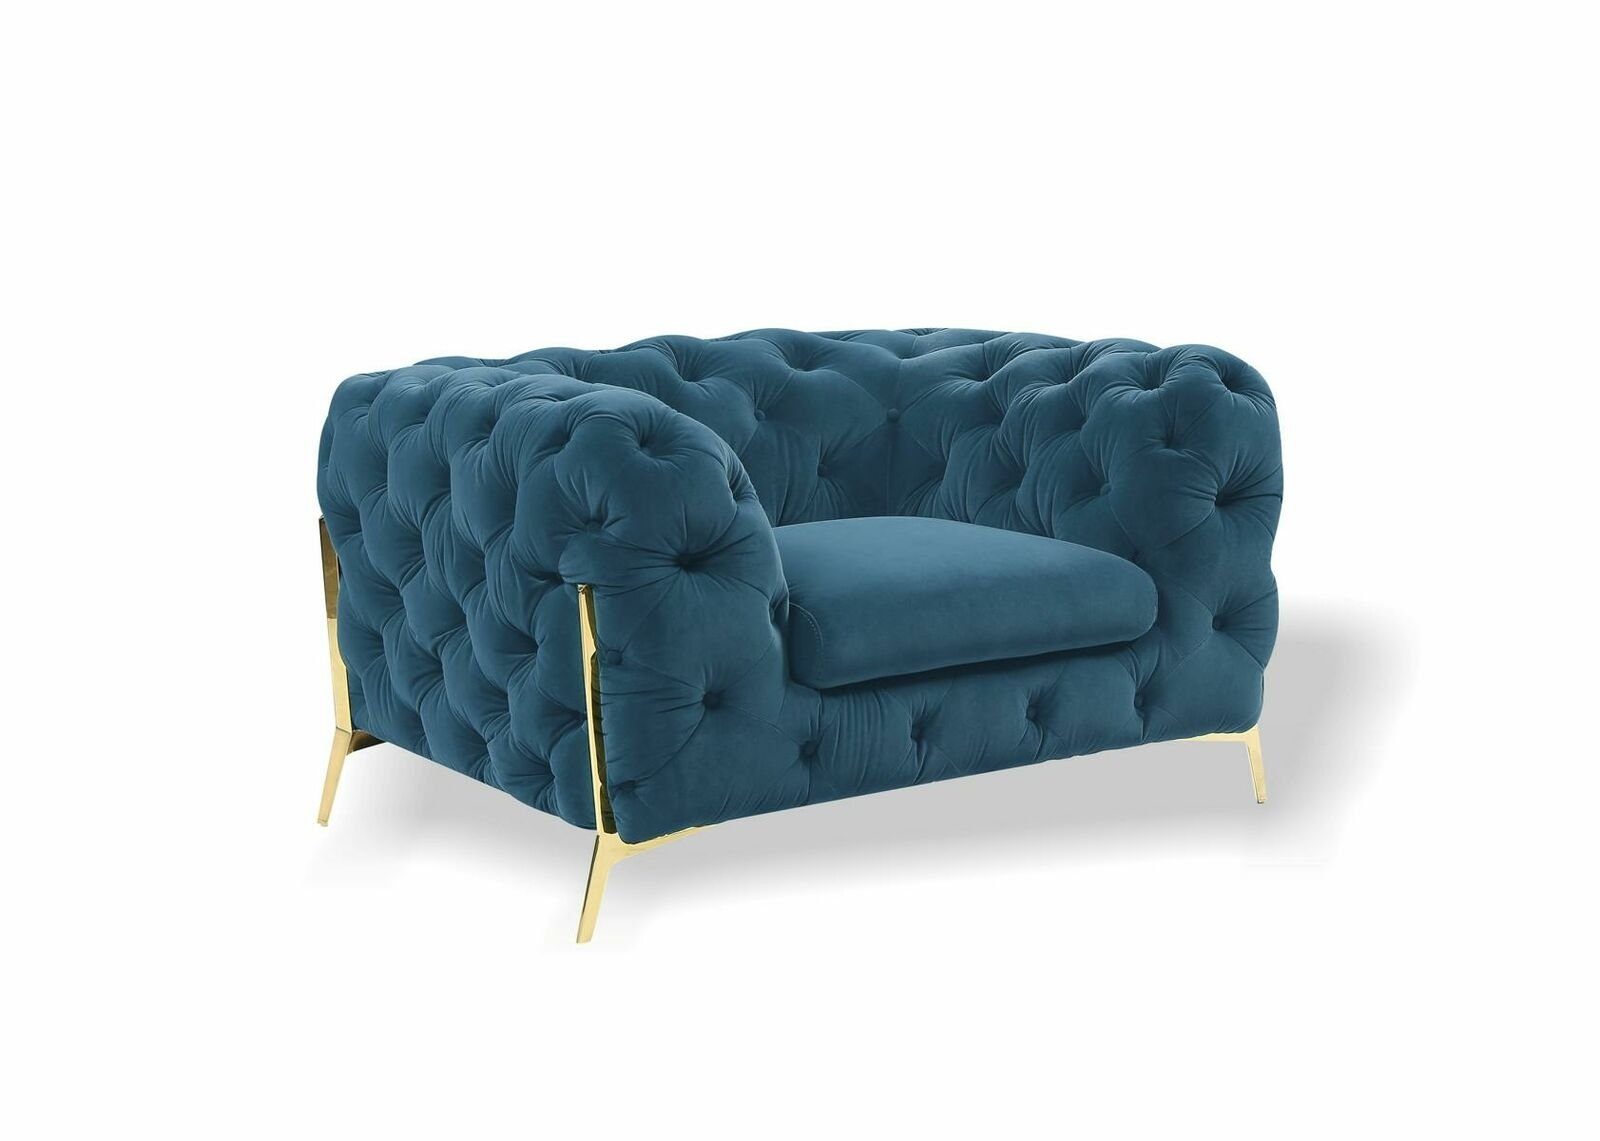 Chesterfield Ohrensessel Couch JVmoebel Sofa in 1 Sitzer Couch (Sessel), Sessel Polster Europe Made Blau Ohrensessel